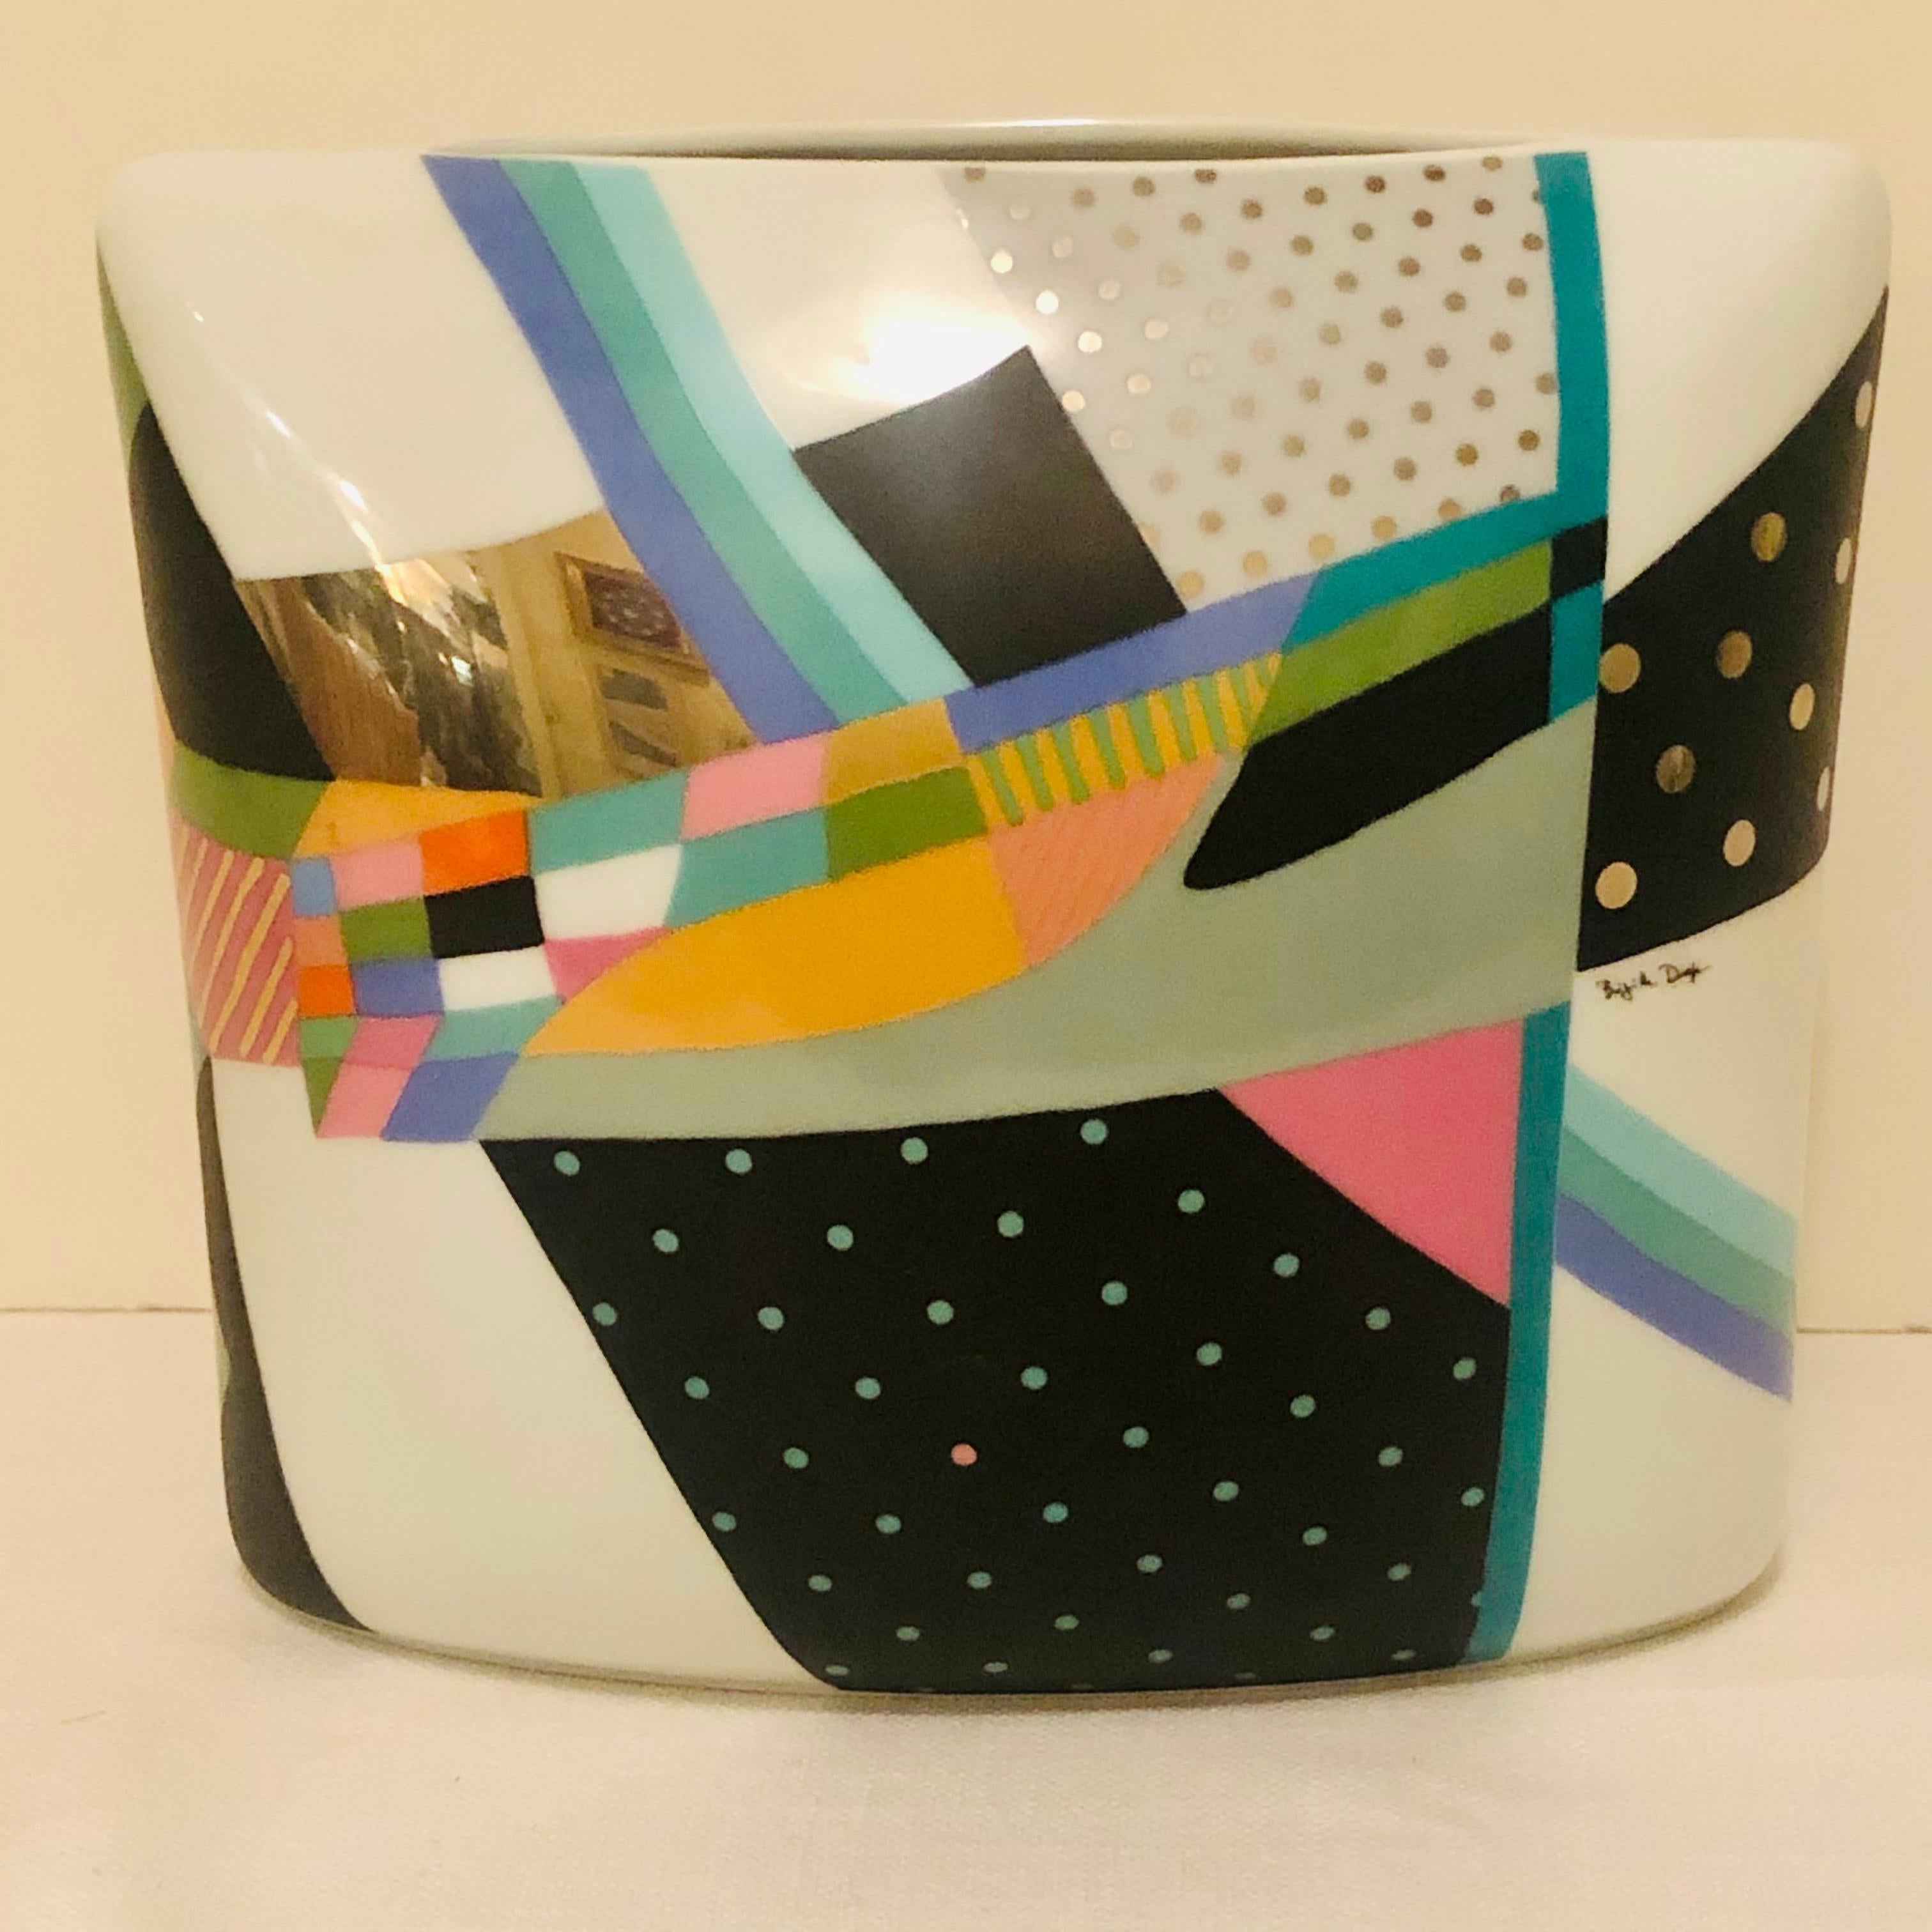 This is a fabulous Rosenthal Art Deco vase with colorful abstract paintings on both sides. It is 7.5 inches tall and 9.75 inches wide. This would make a wonderful eye catching decoration in any home with a Mid-Century Modern to a modern decor.
Price